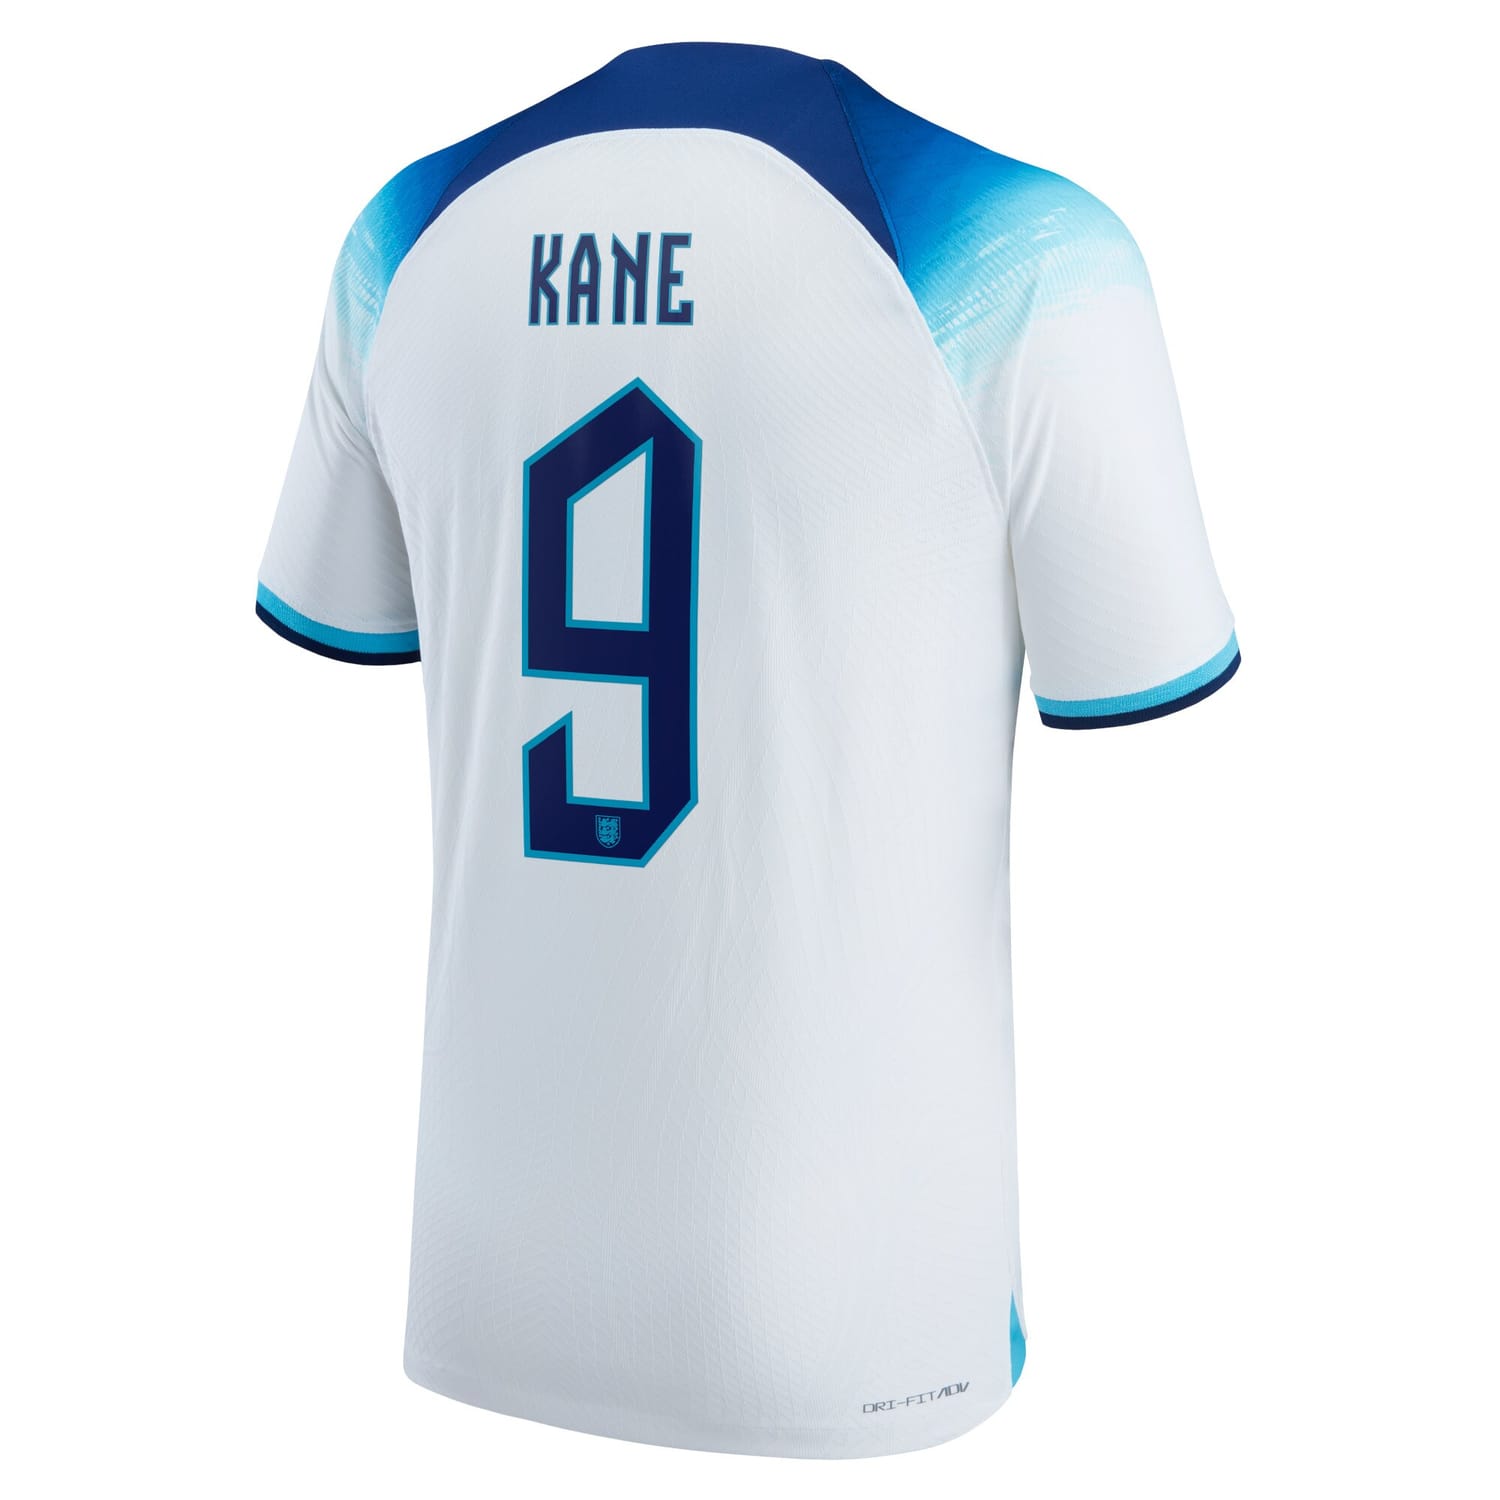 England National Team Away Authentic Jersey Shirt White 2022-23 player Harry Kane printing for Men